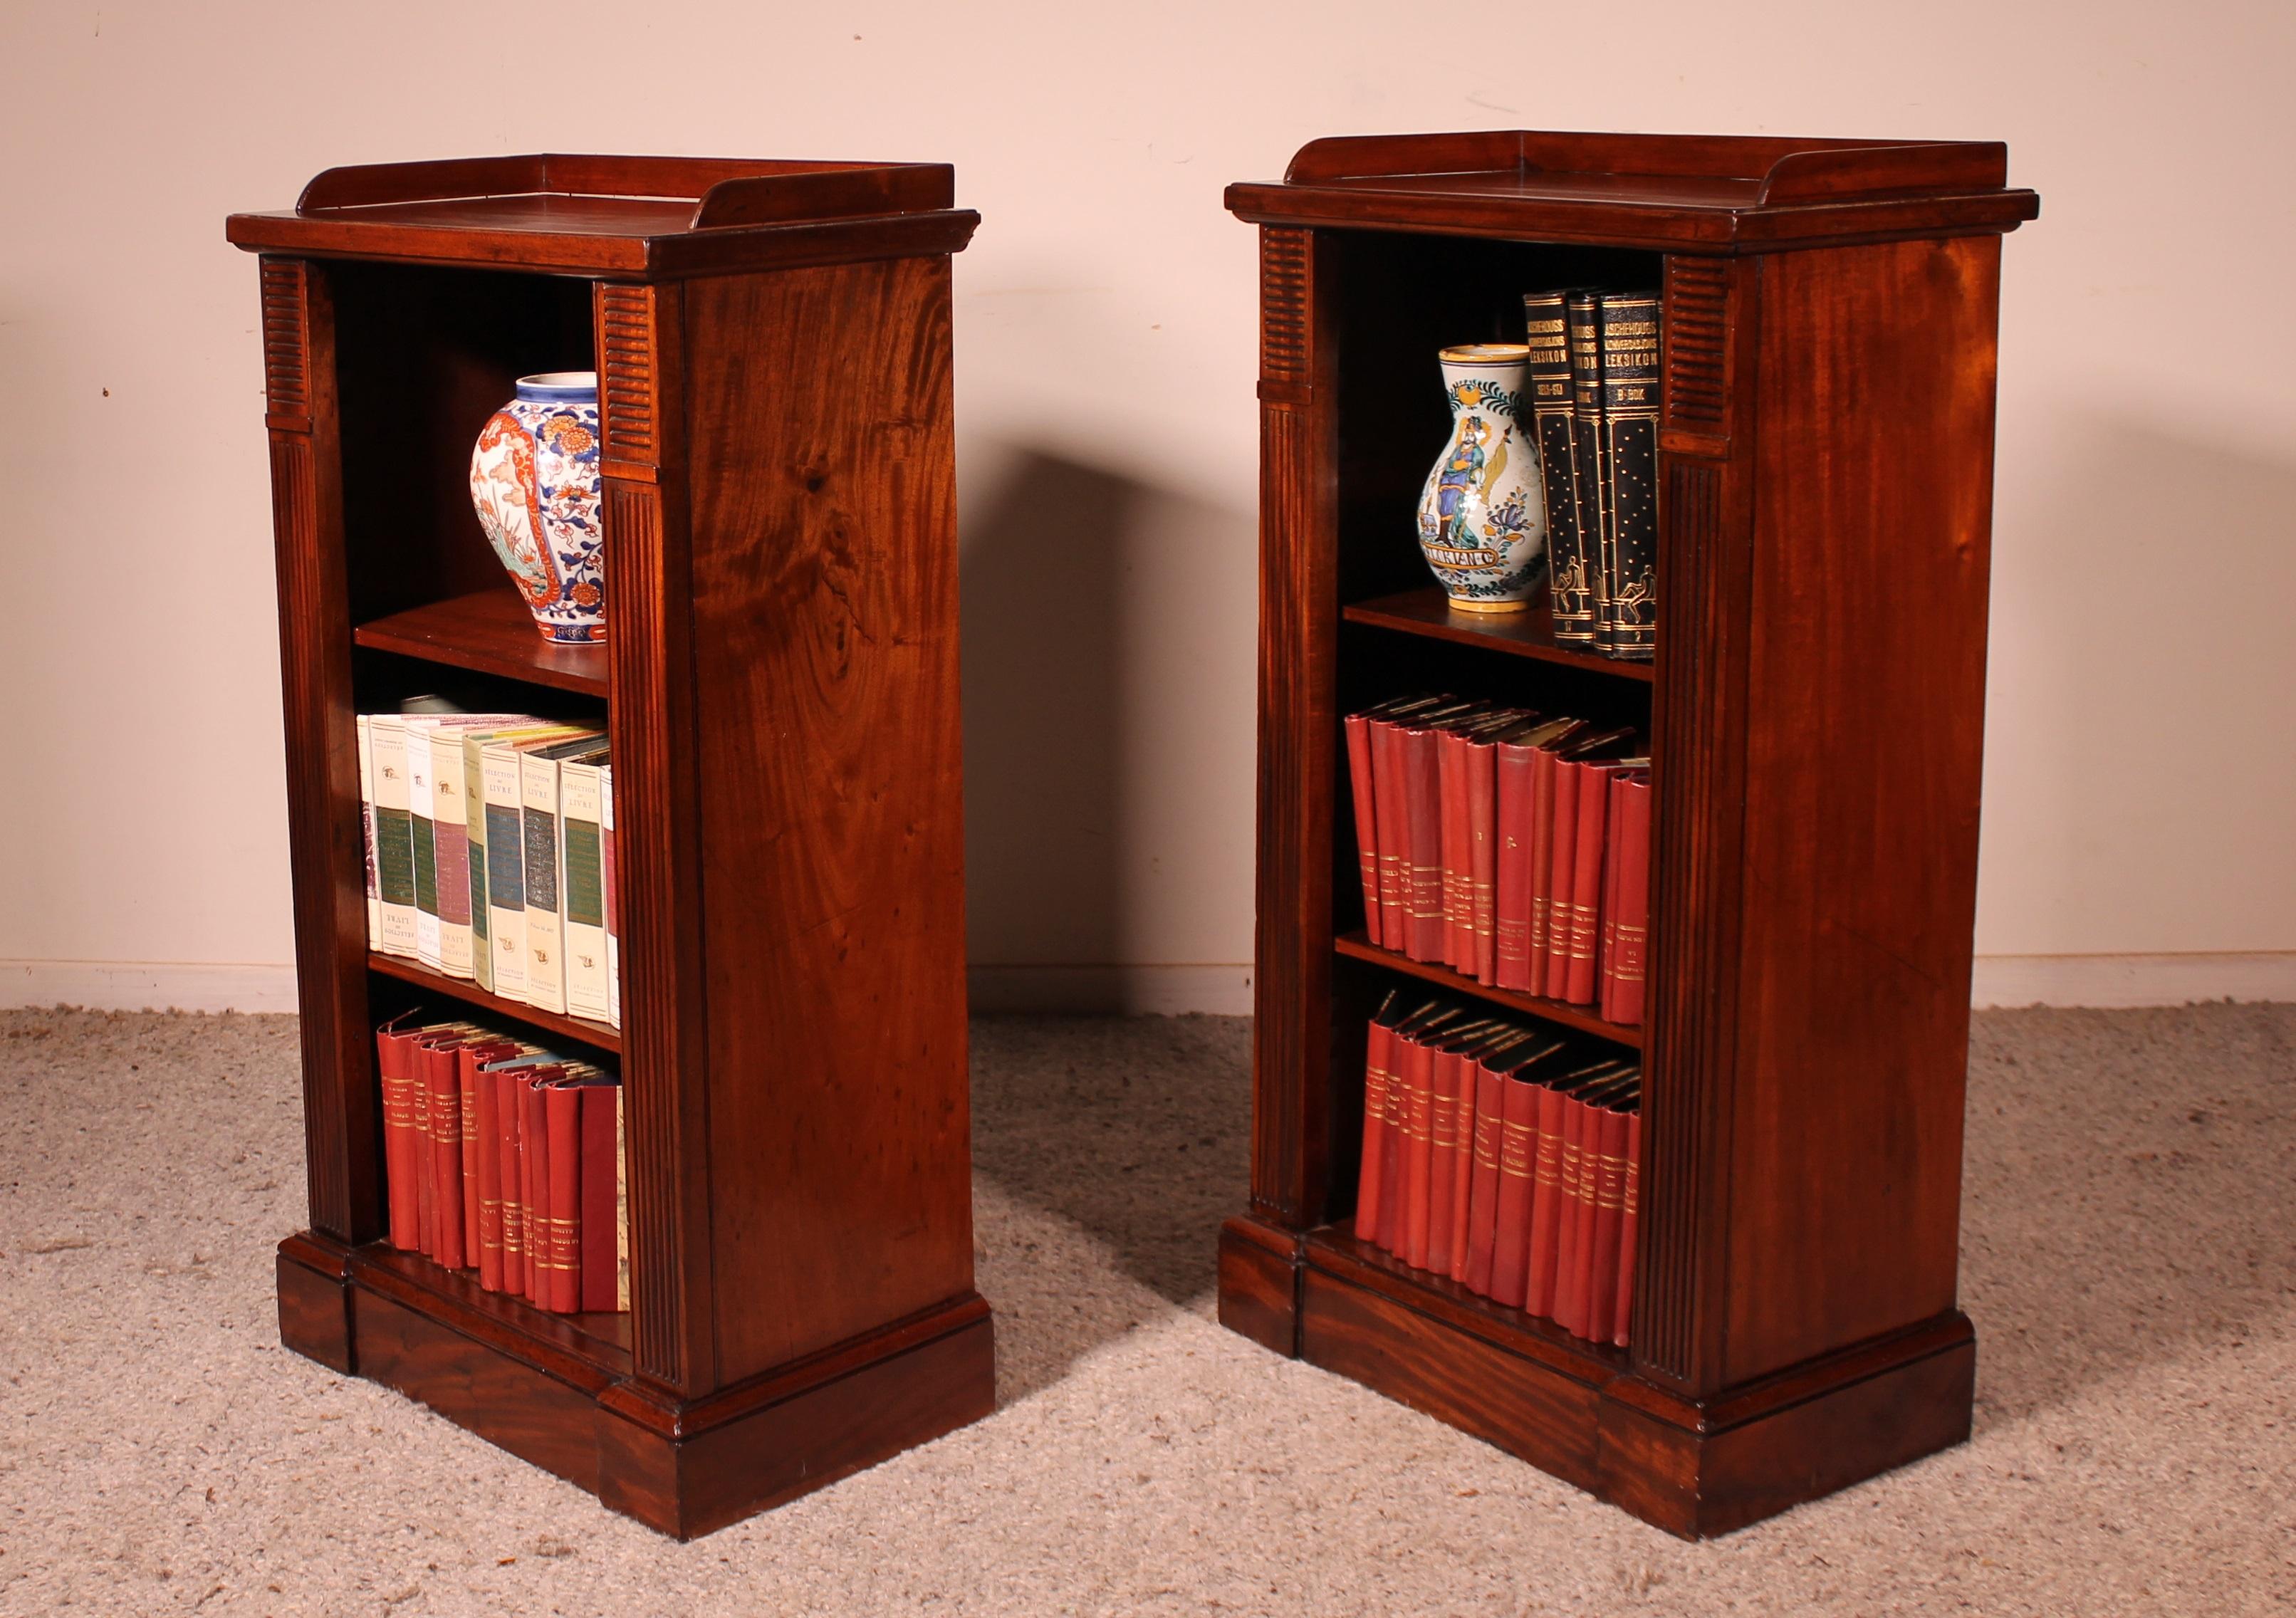 Mahogany Pair of Open Bookcases from the Beginning of the 19th Century, William IV